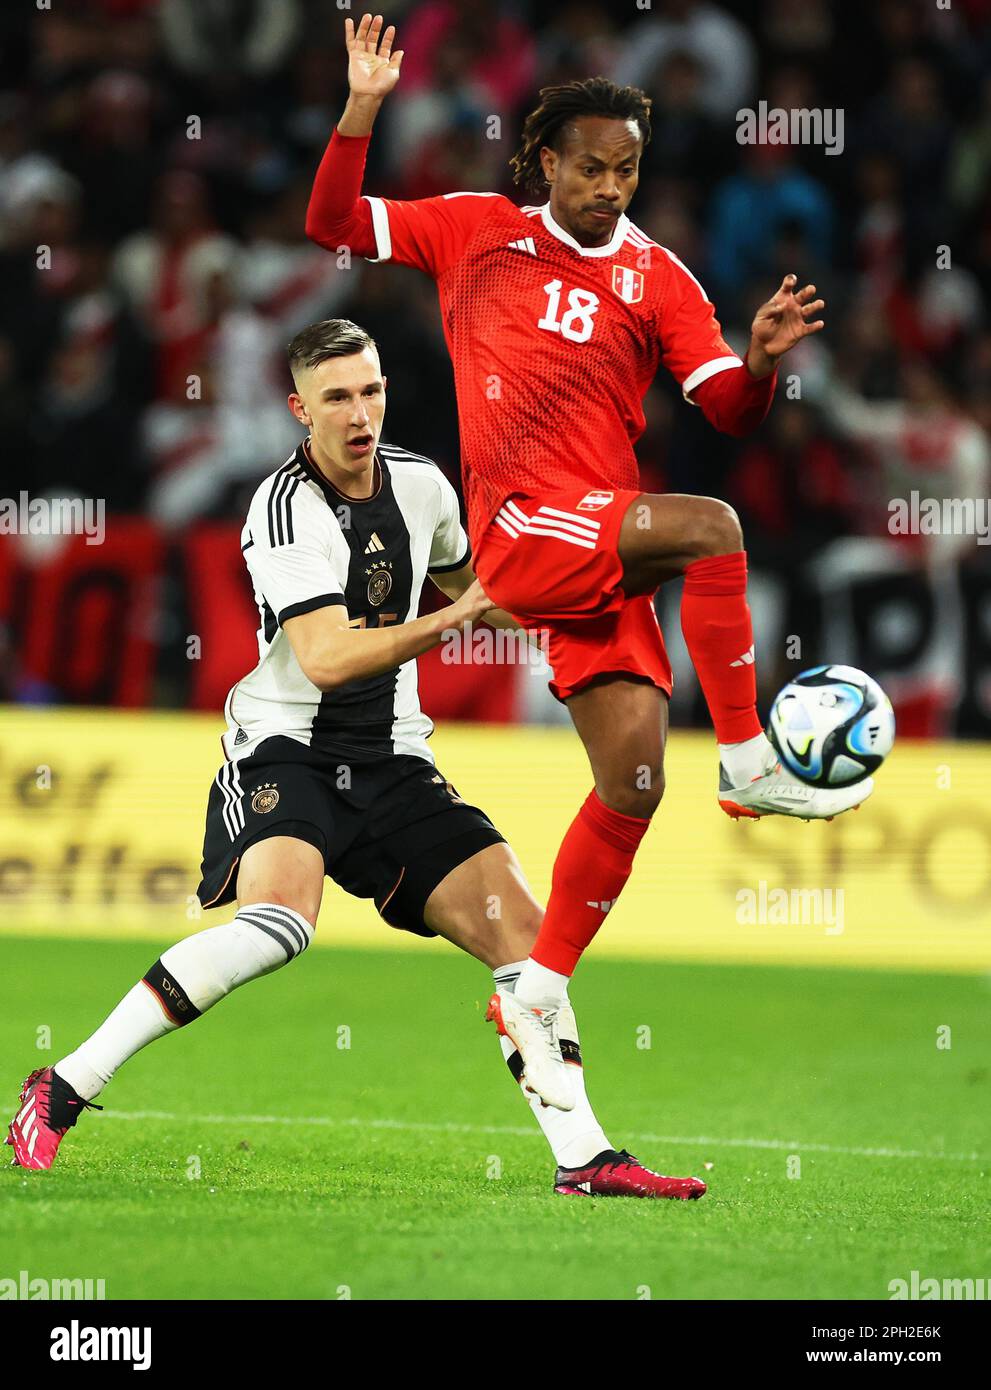 Mainz, Germany. 25th Mar, 2023. Soccer: Internationals, Germany - Peru, Mewa Arena. Germany's Nico Schlotterbeck (l) and Peru's André Carrillo fight for the ball. Credit: Christian Charisius/dpa/Alamy Live News Stock Photo